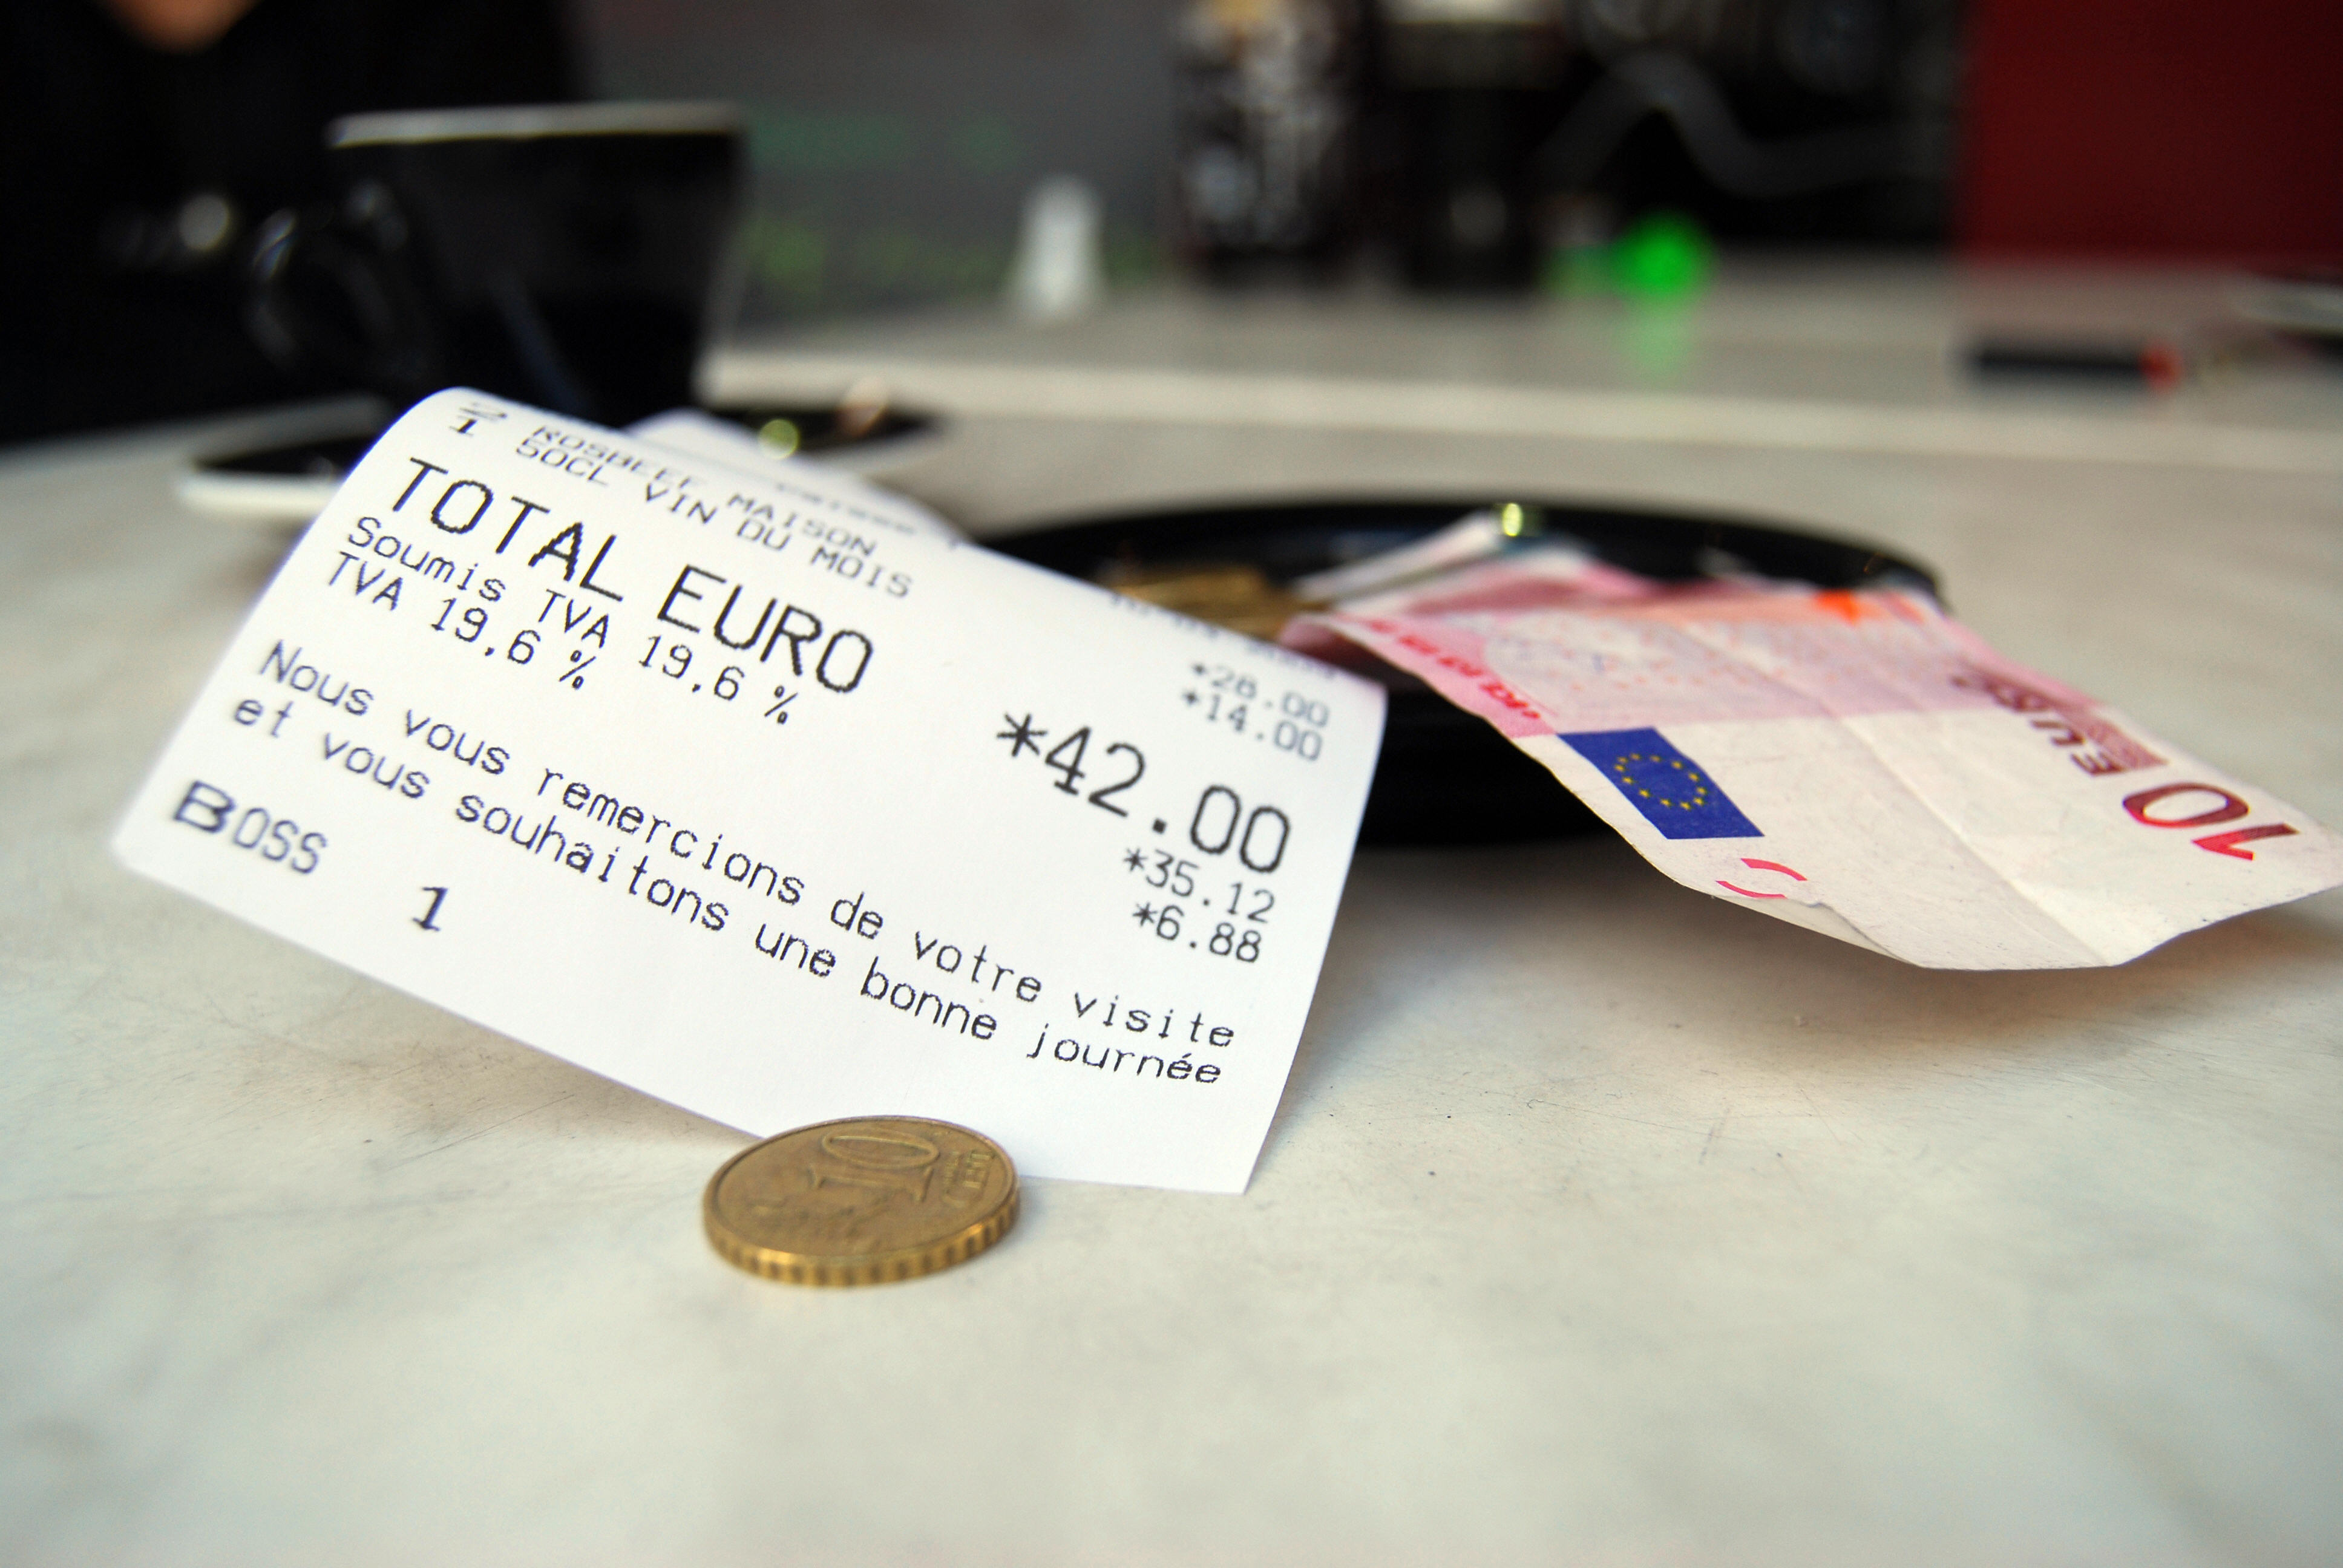 An invoice shows the 19.6 percent tax on a beverage at a restaurant in Paris on March 10, 2009. (Caroline VENTEZOU/AFP via Getty Images)